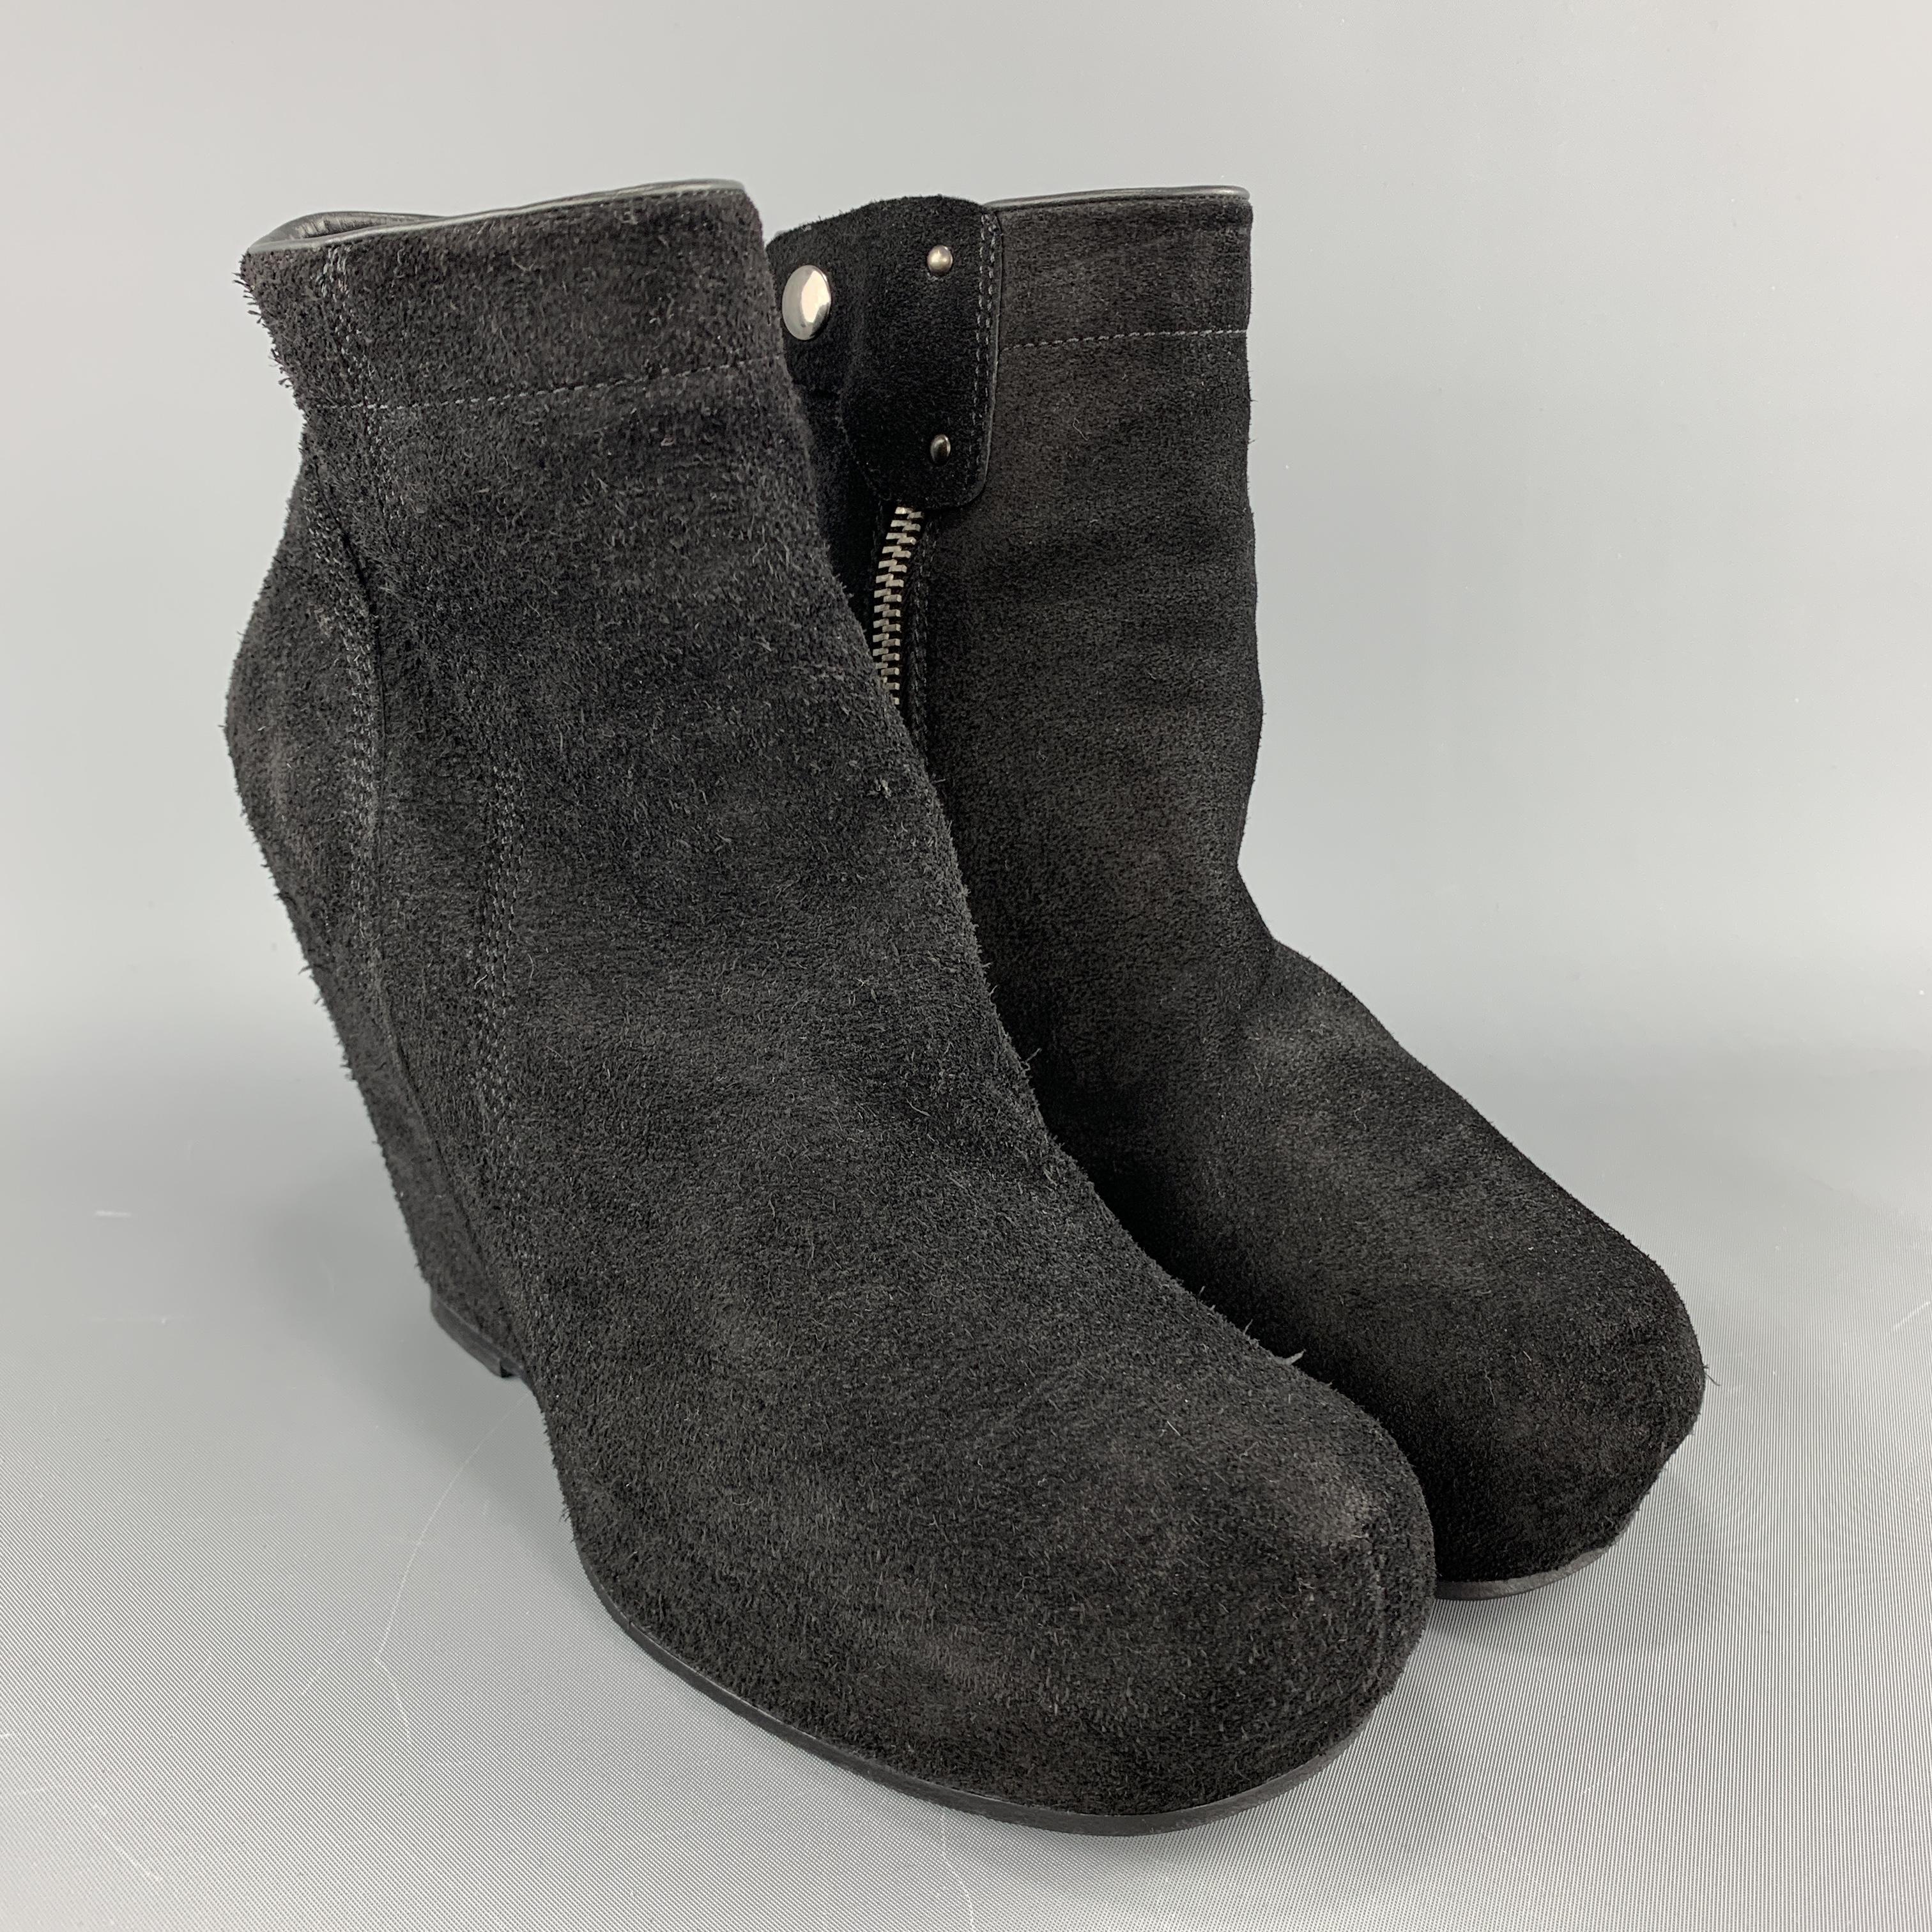 RICK OWENS booties come in black suede with a round toe, covered wedge platform, and inner zip. Made in Italy.

Good Pre-Owned Condition.
Marked: IT 39

Measurements:

Heel: 4 in.
Platform: 1 in.